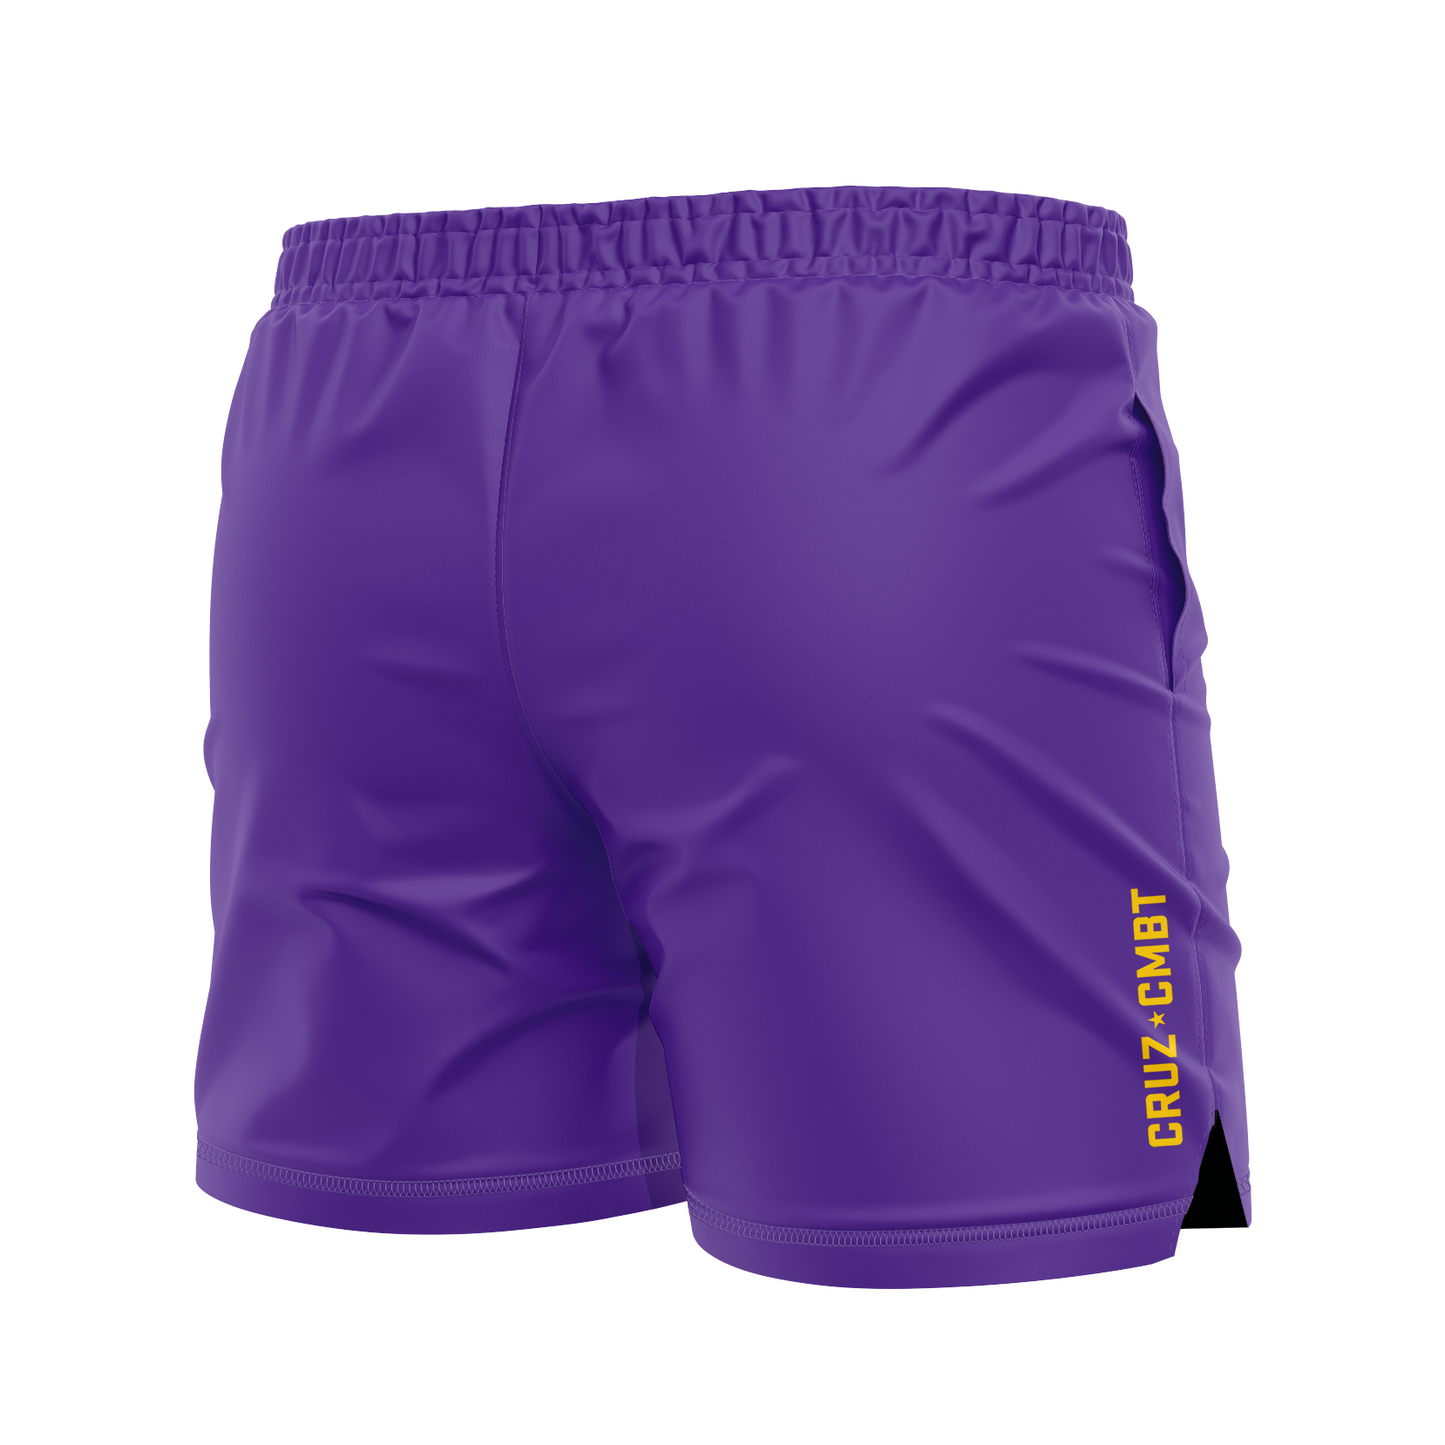 Base Collection men's FC shorts, purple and athl. gold